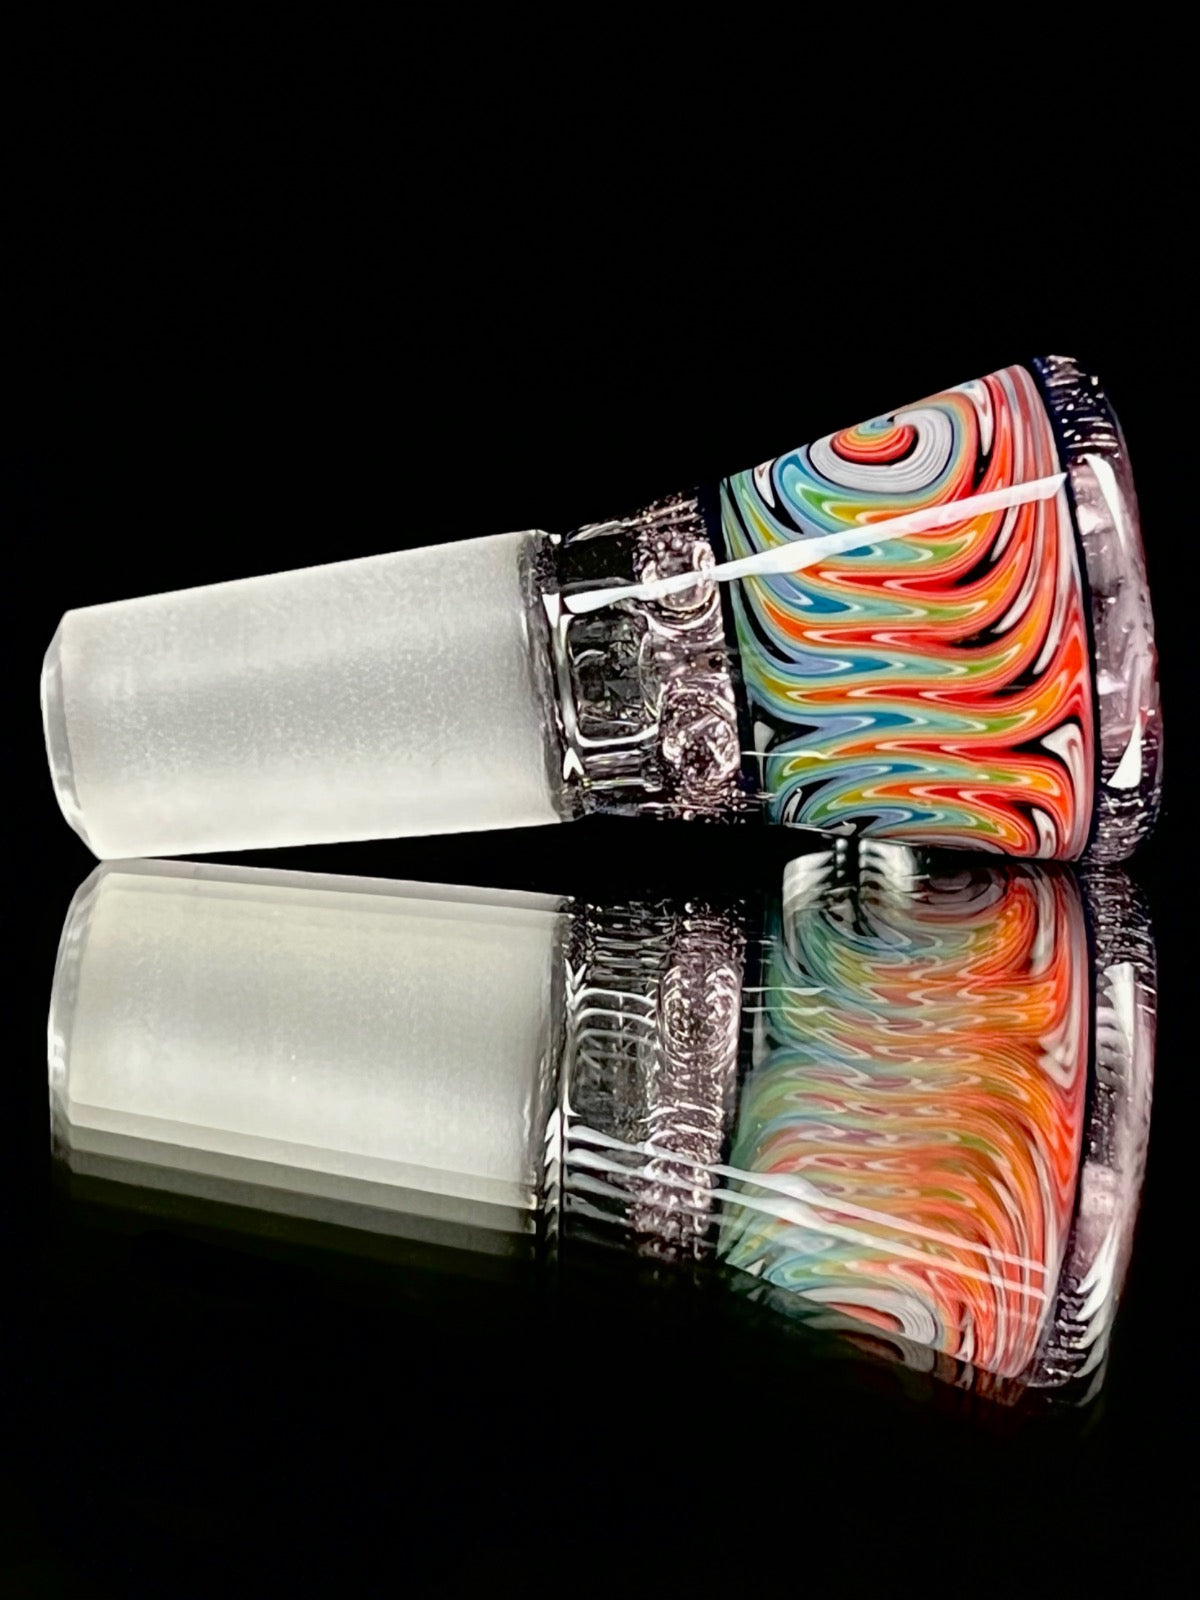 14mm cool pink slide by Mercurius Glass